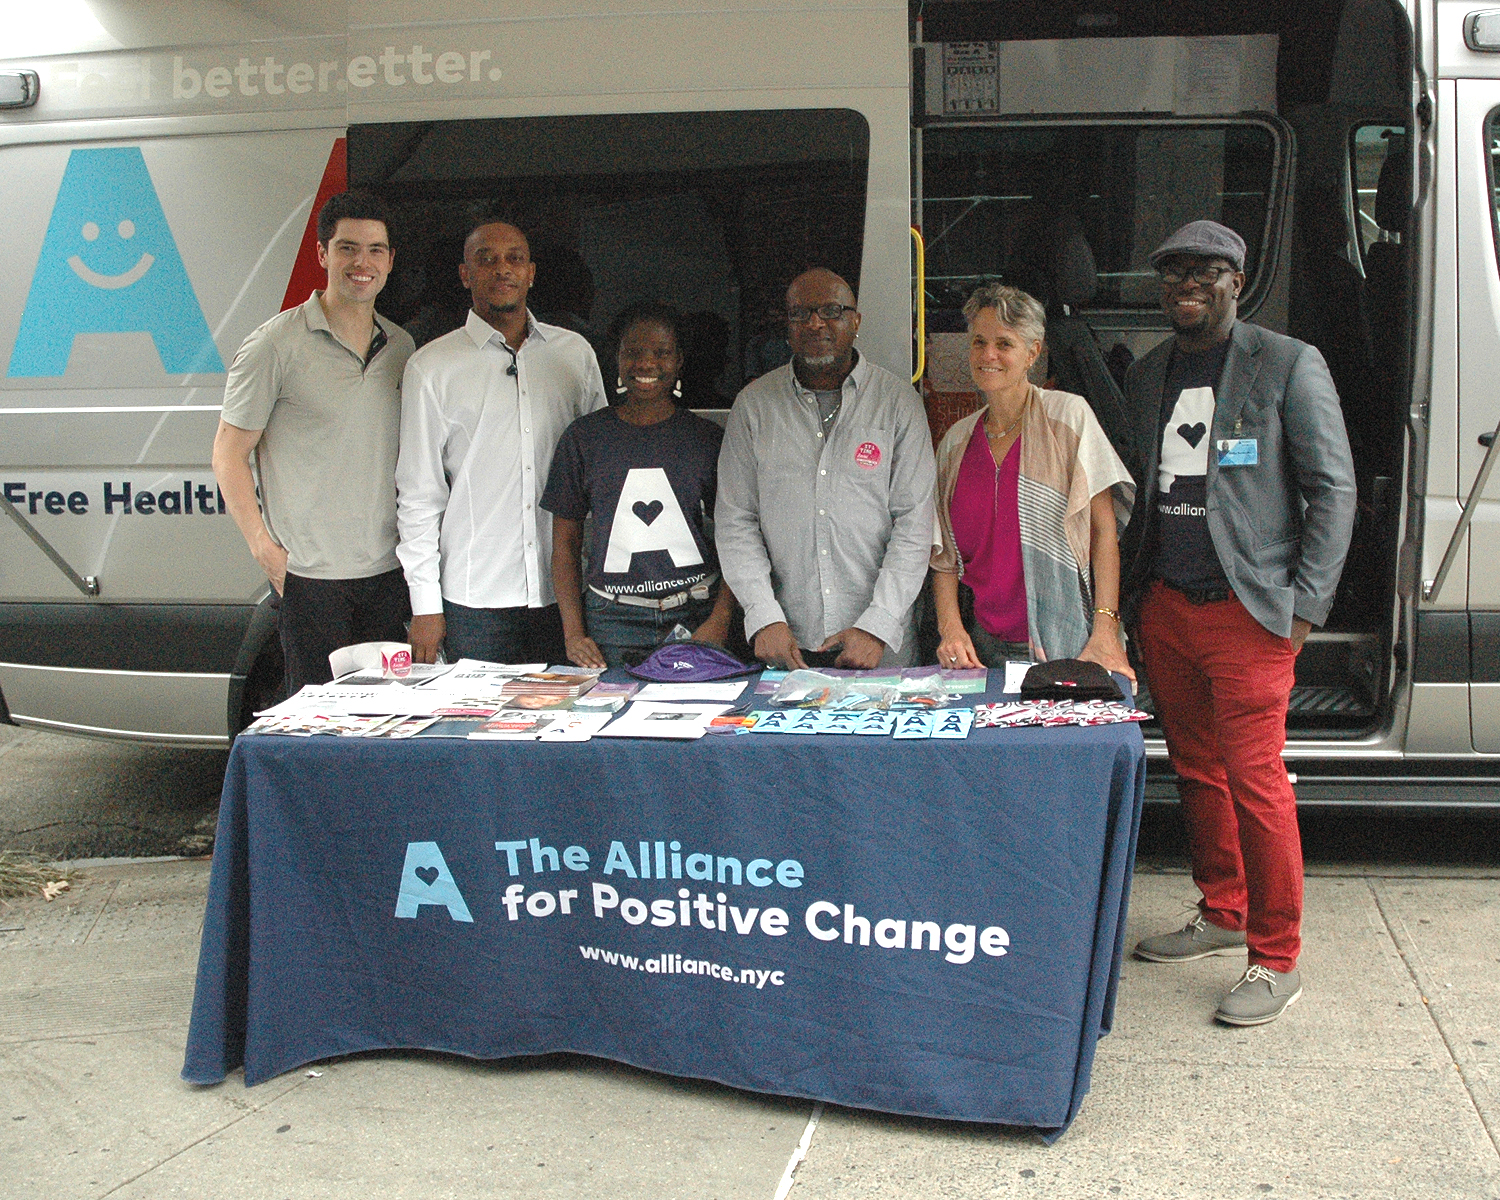 Staff members at the Alliance on the Move bus David Nager:Alliance for Positive Change